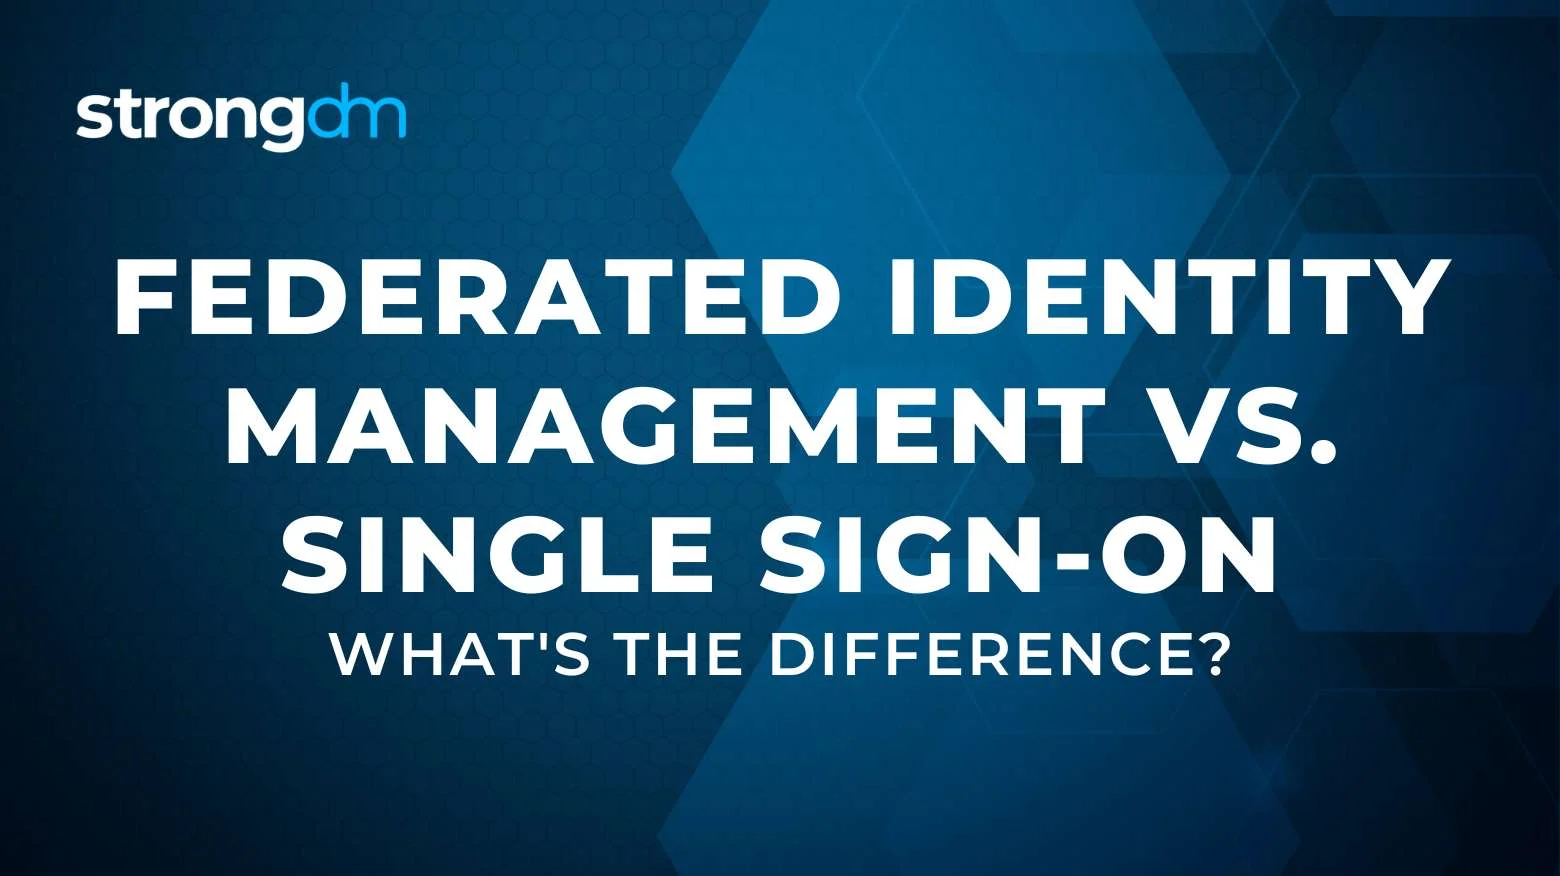 Federated Identity Management vs. Single Sign-On: What's the Difference?